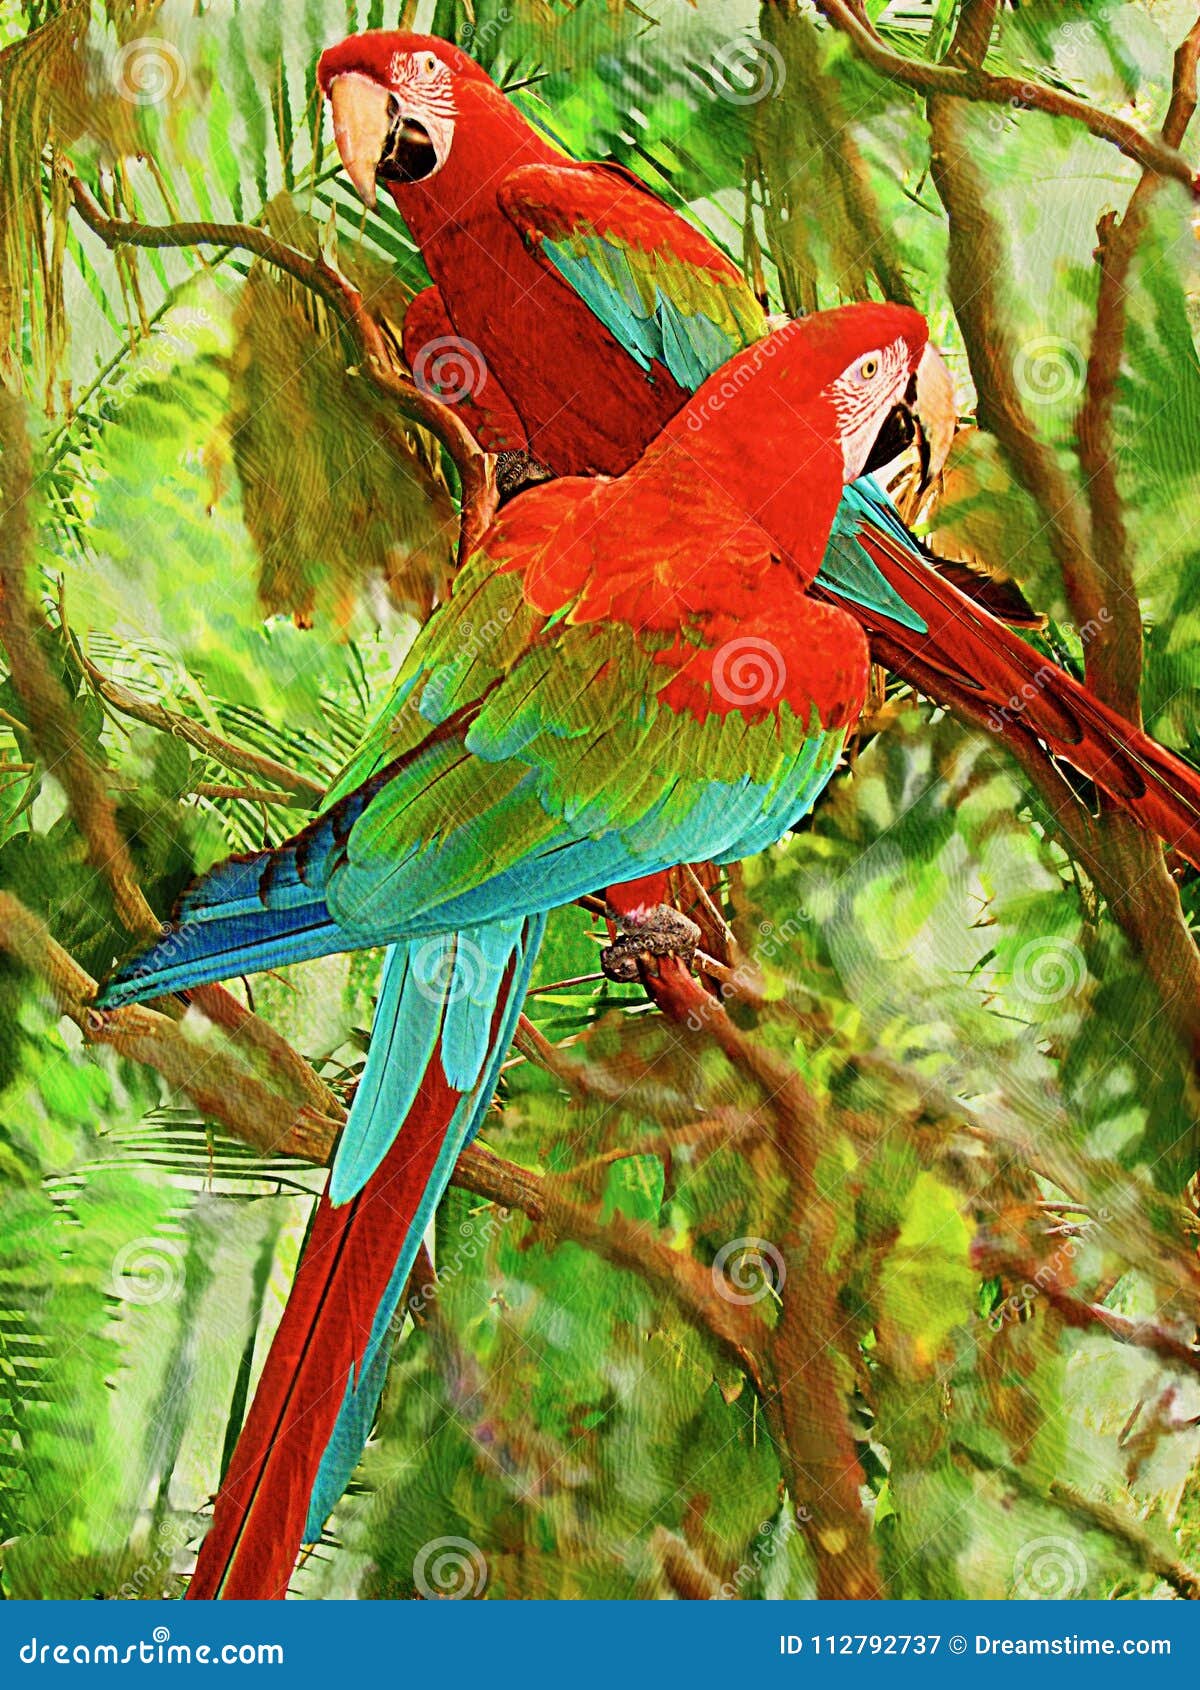 113 Twin Parrots Photos Free Royalty Free Stock Photos From Dreamstime,Bathroom Decorating Ideas For Fall